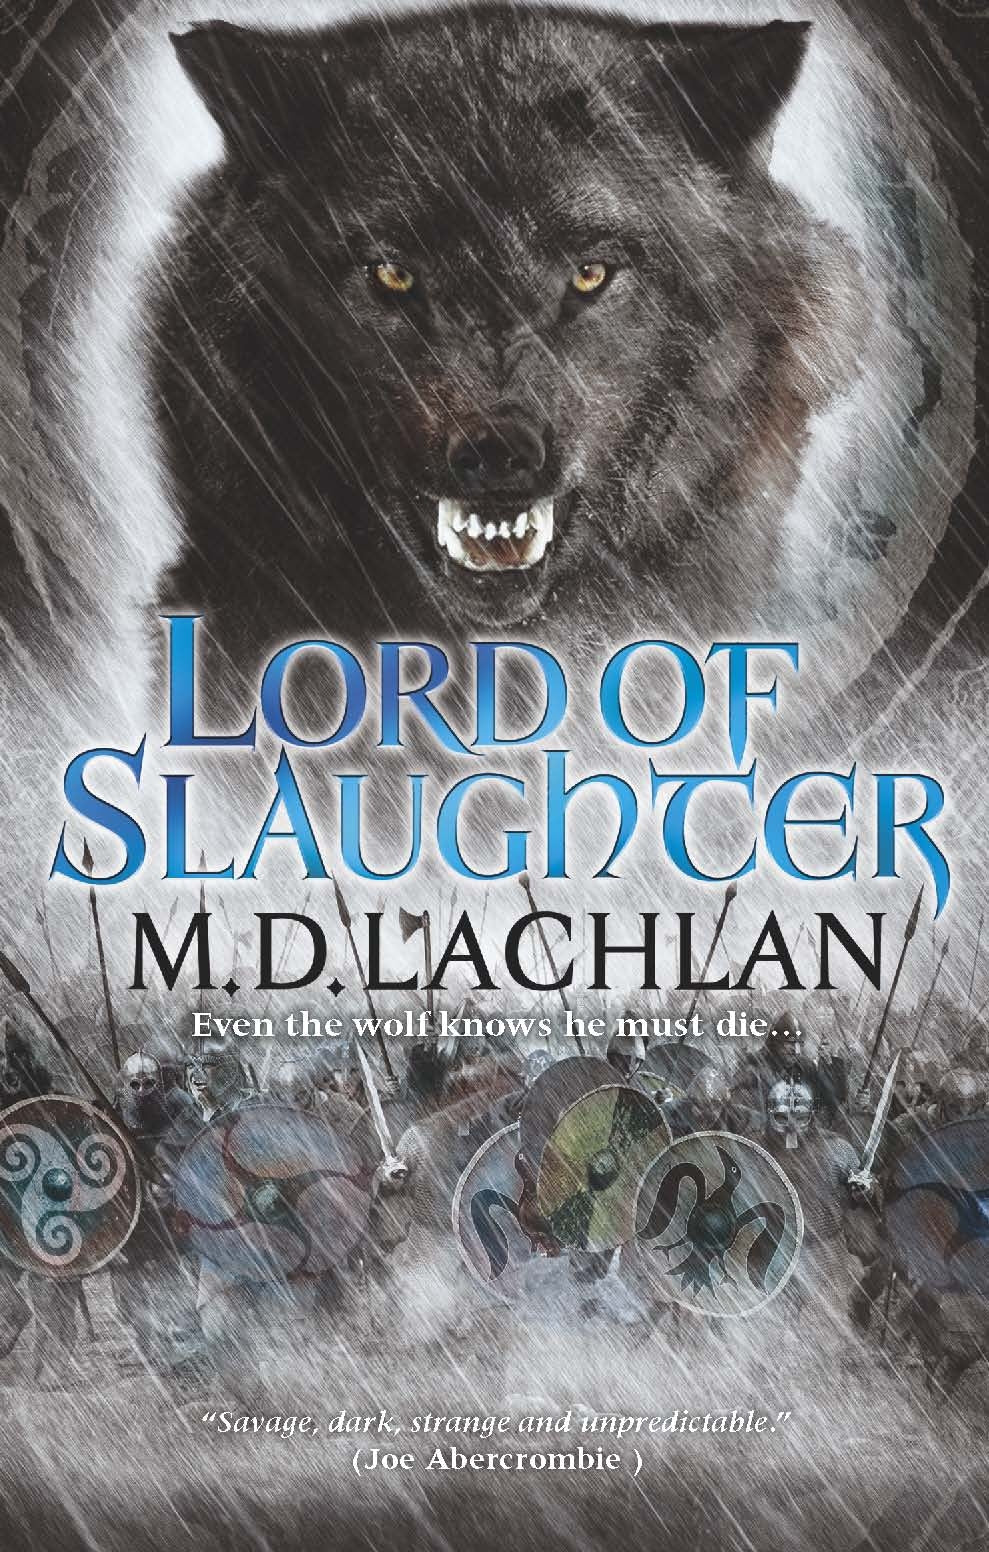 Lord of Slaughter by M.D. Lachlan